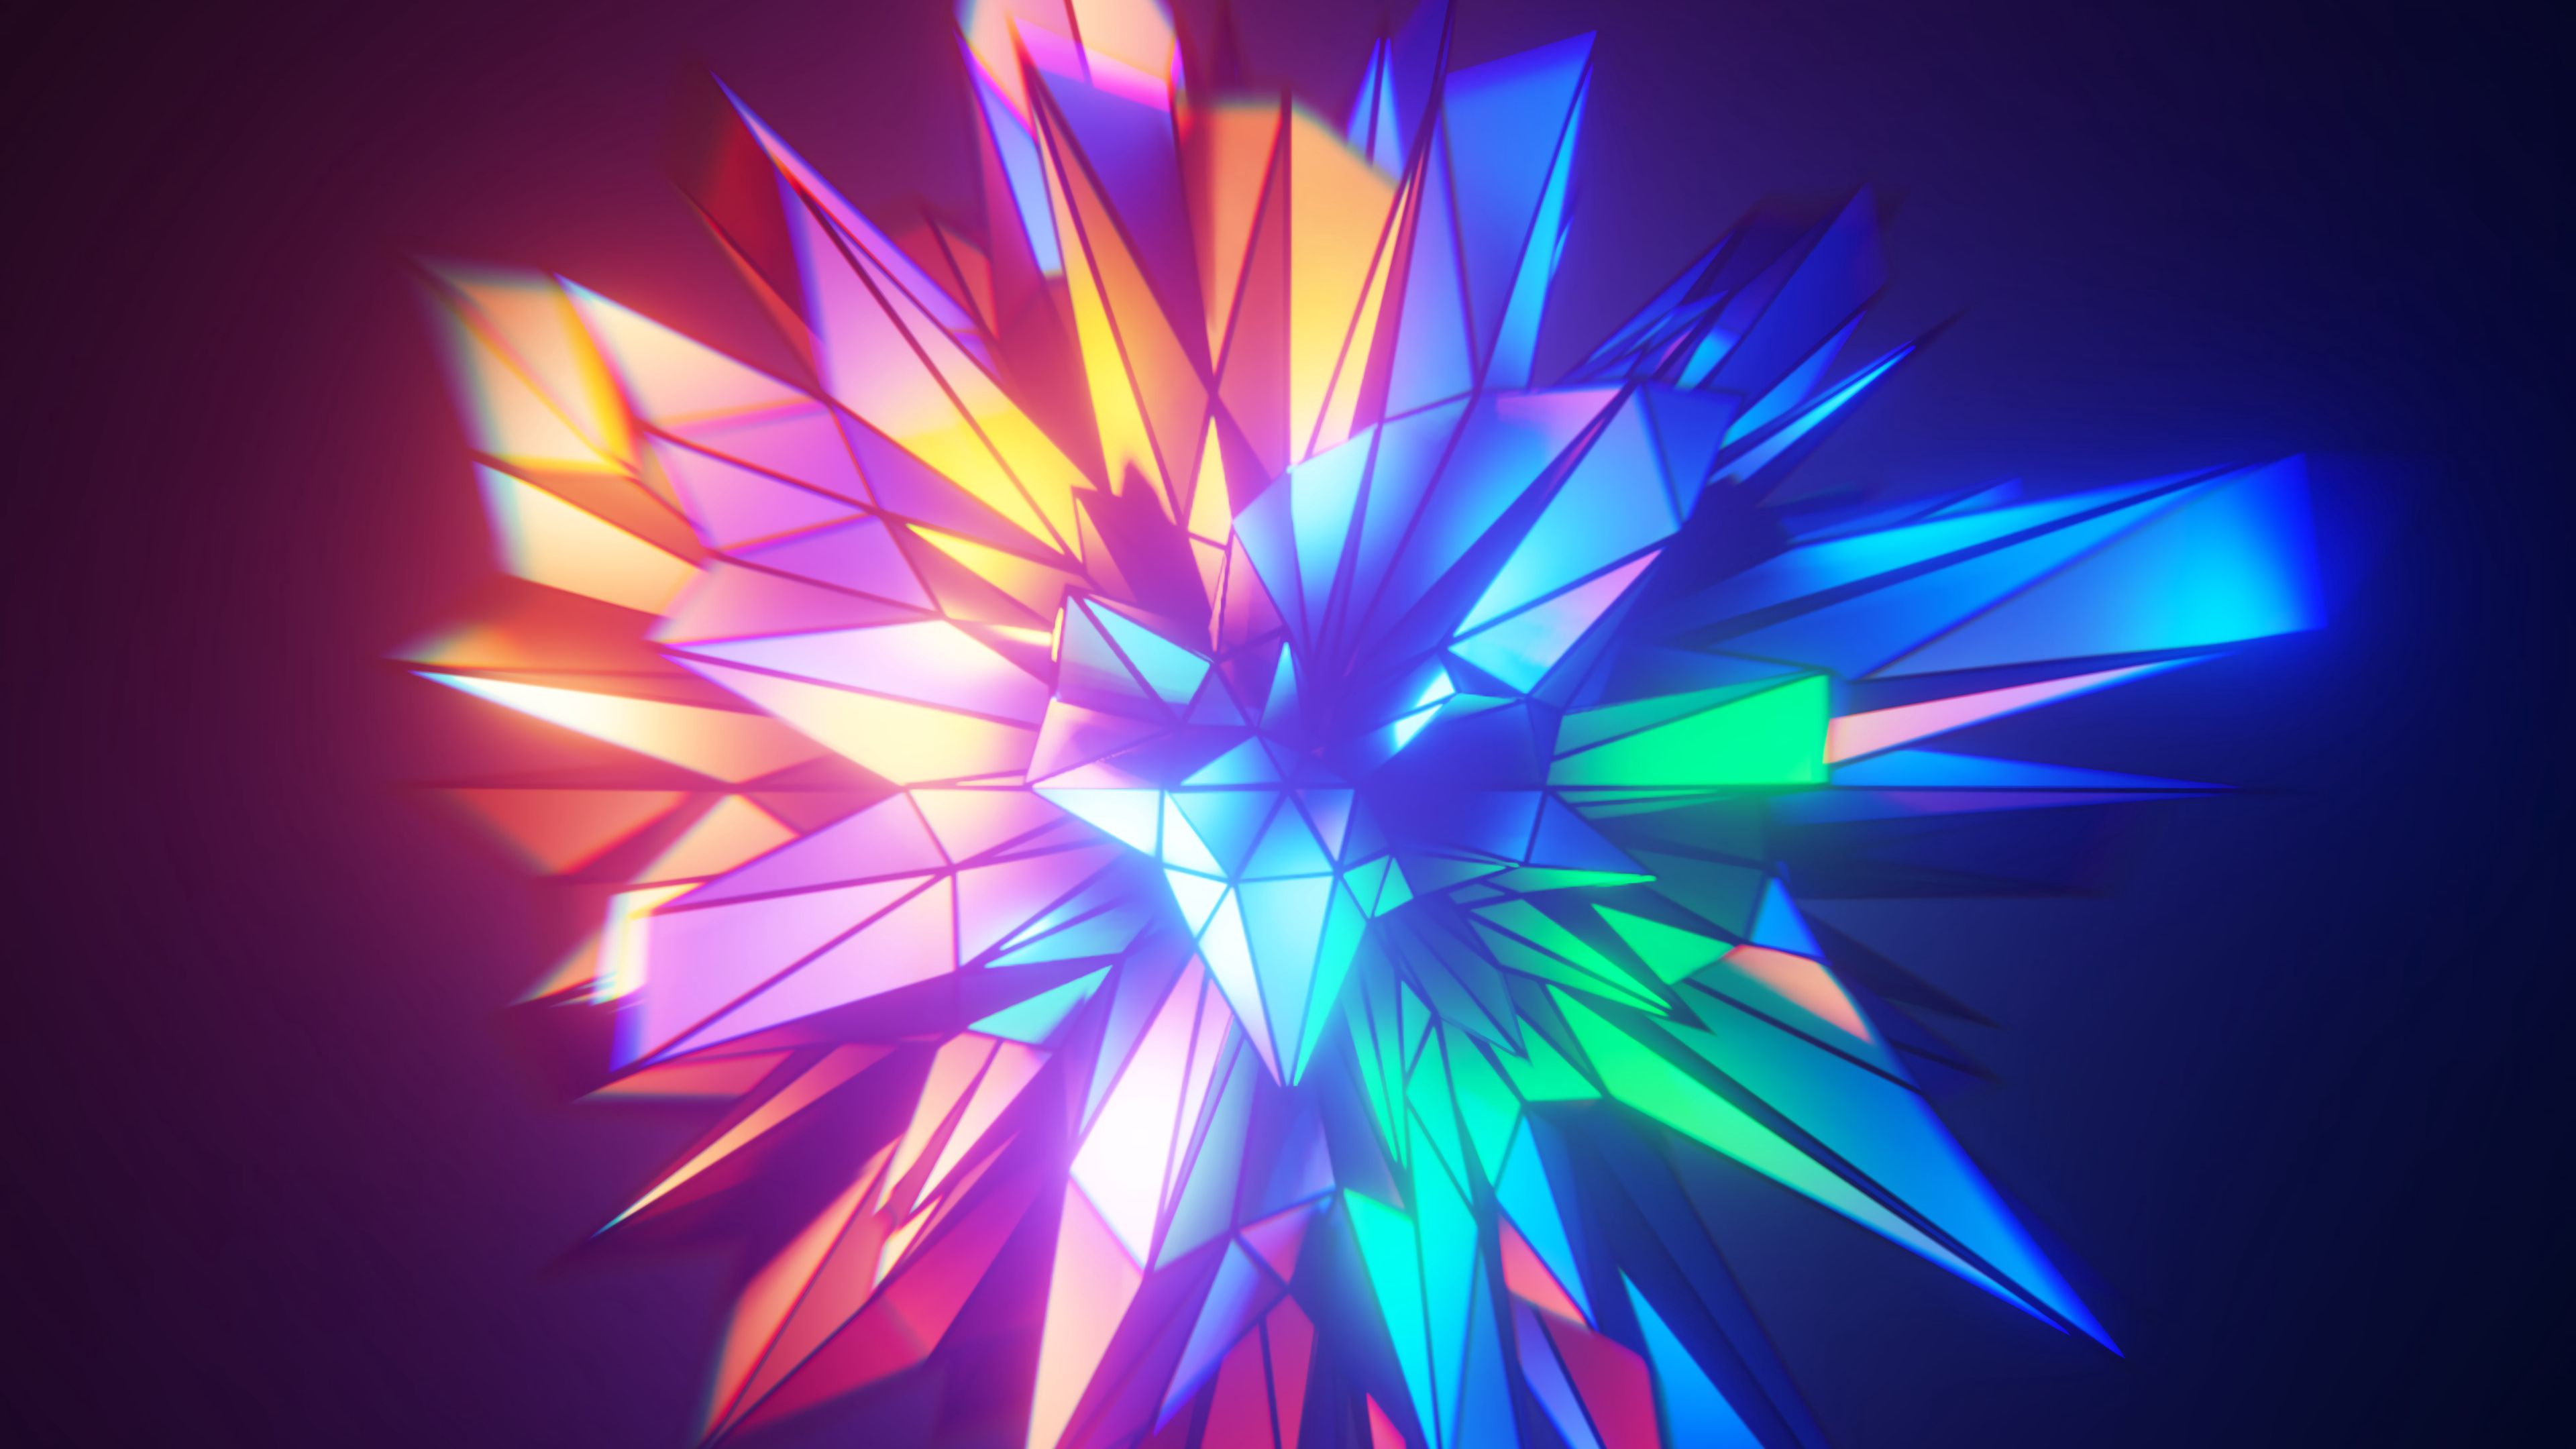 Download wallpaper 3840x2160 crystal, multicolored, faces, geometry 4k uhd 16:9 HD background